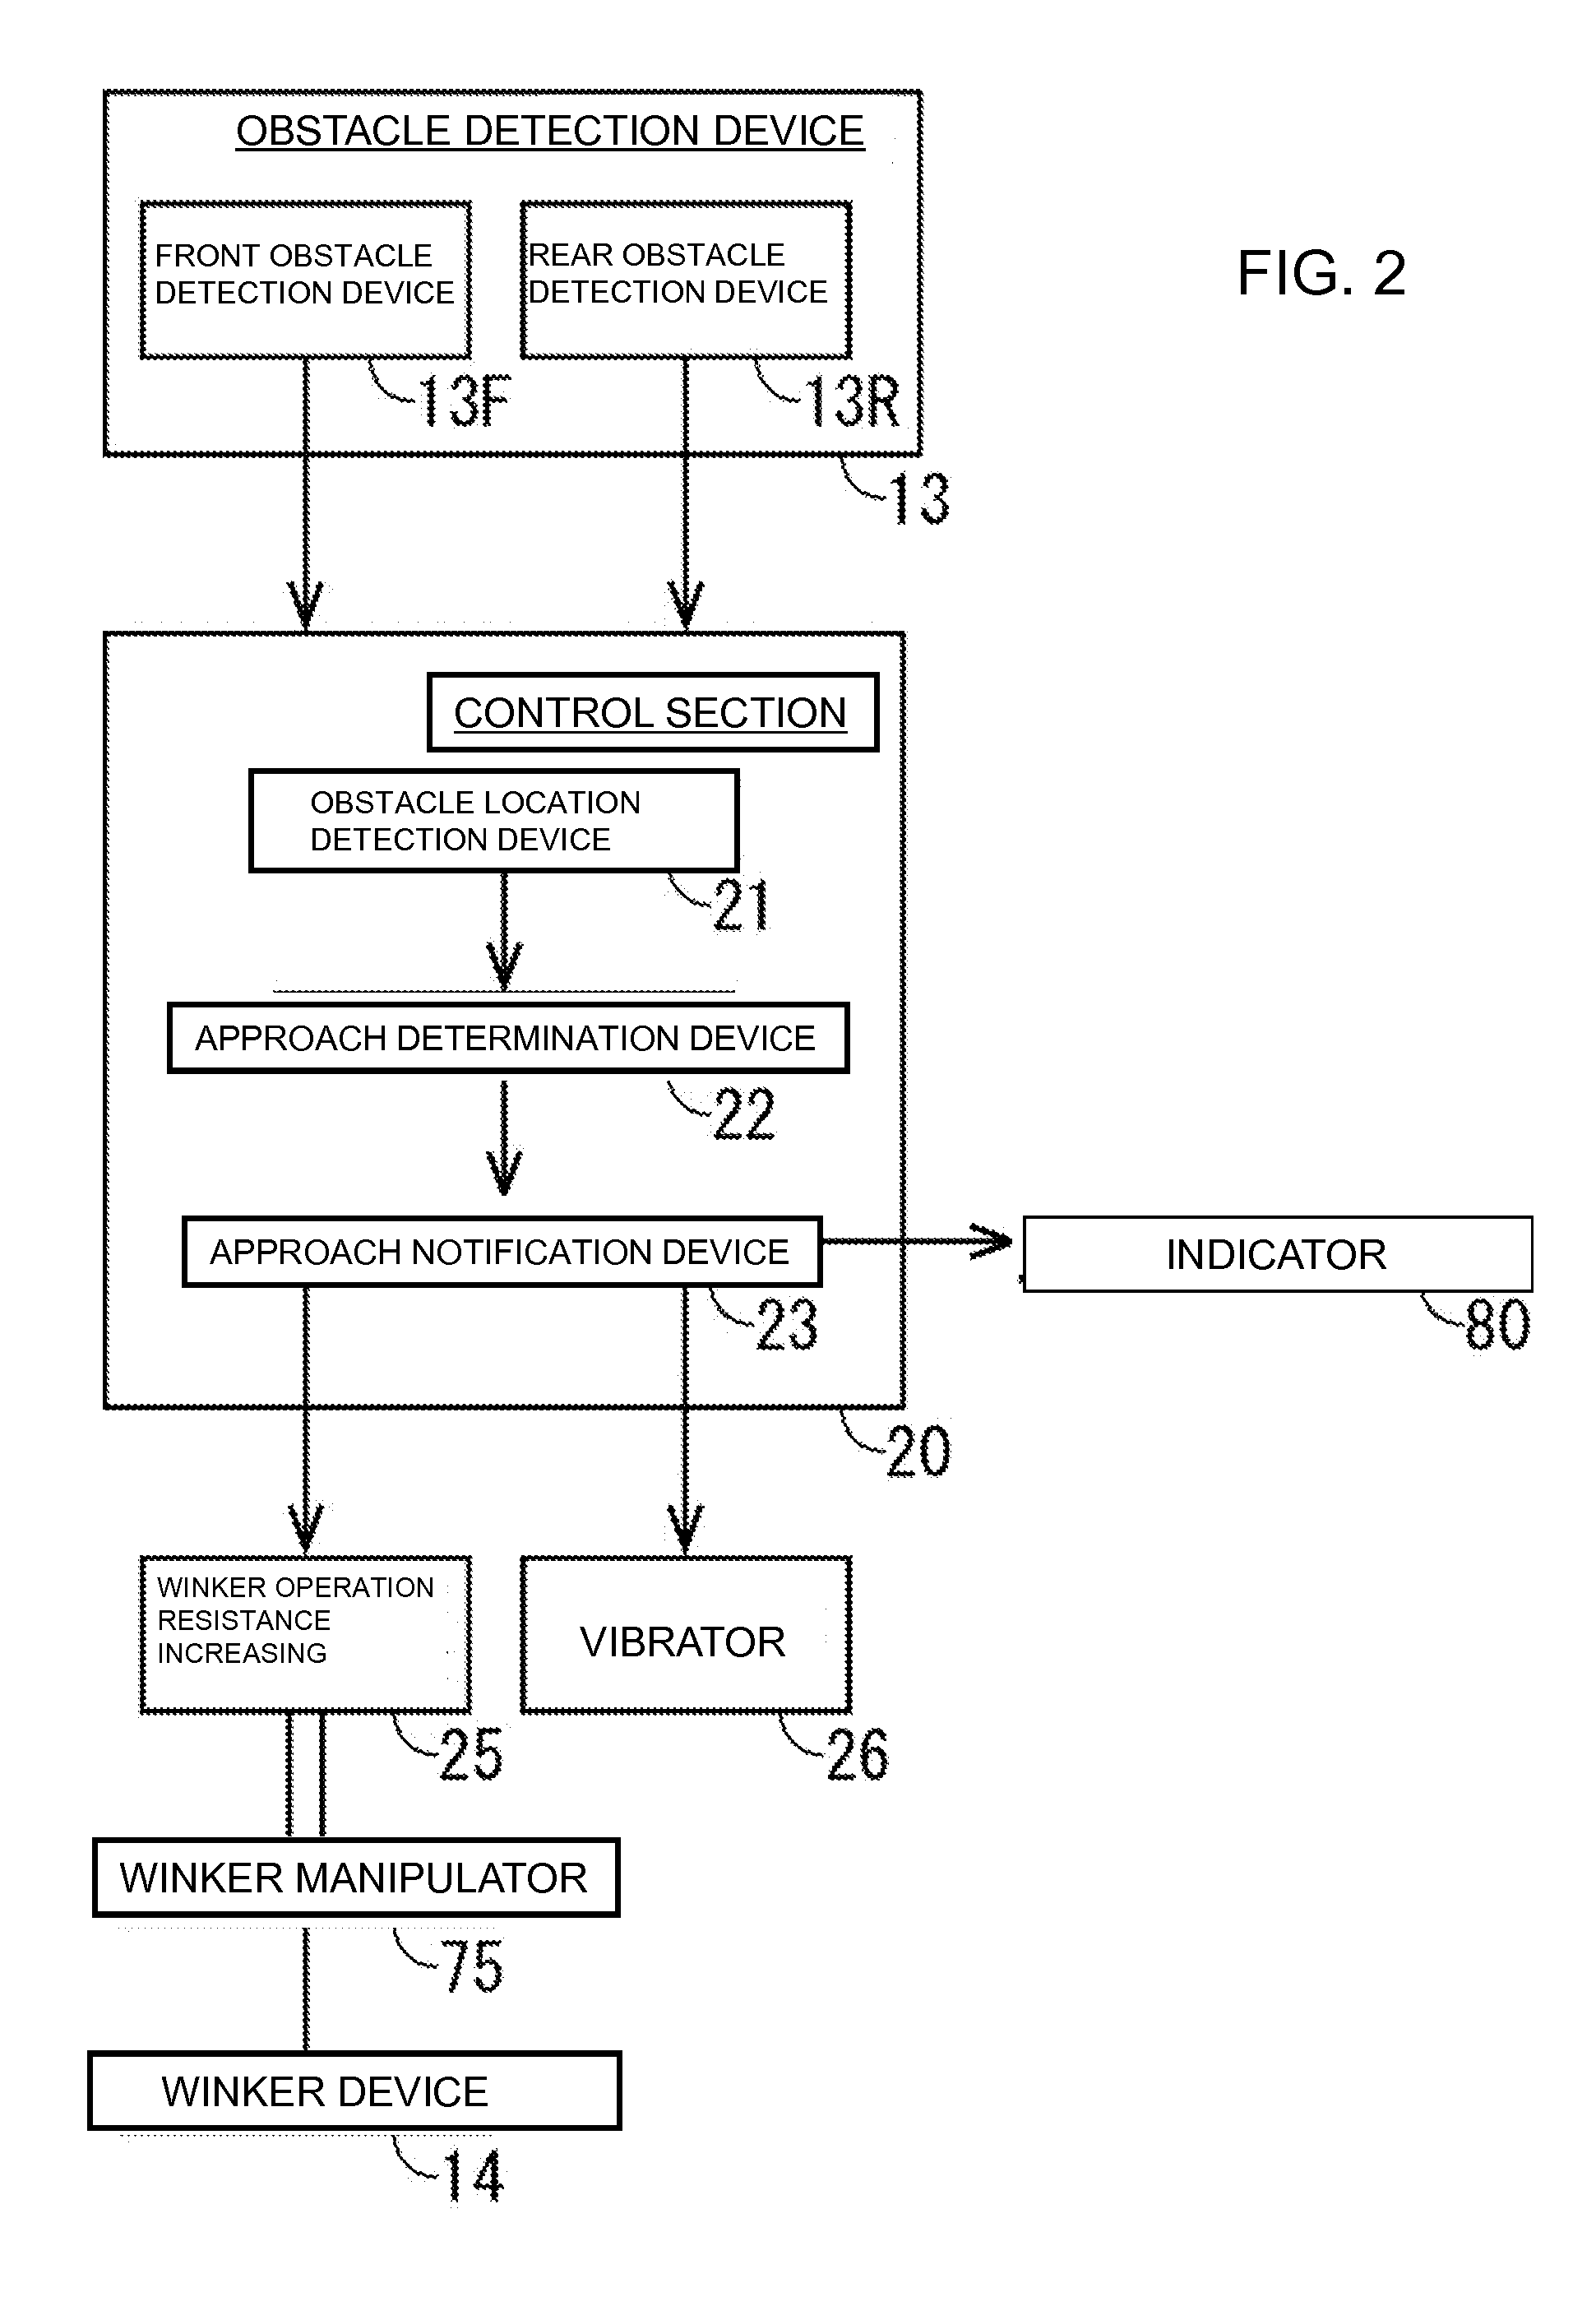 Approach notification device of straddle type vehicle